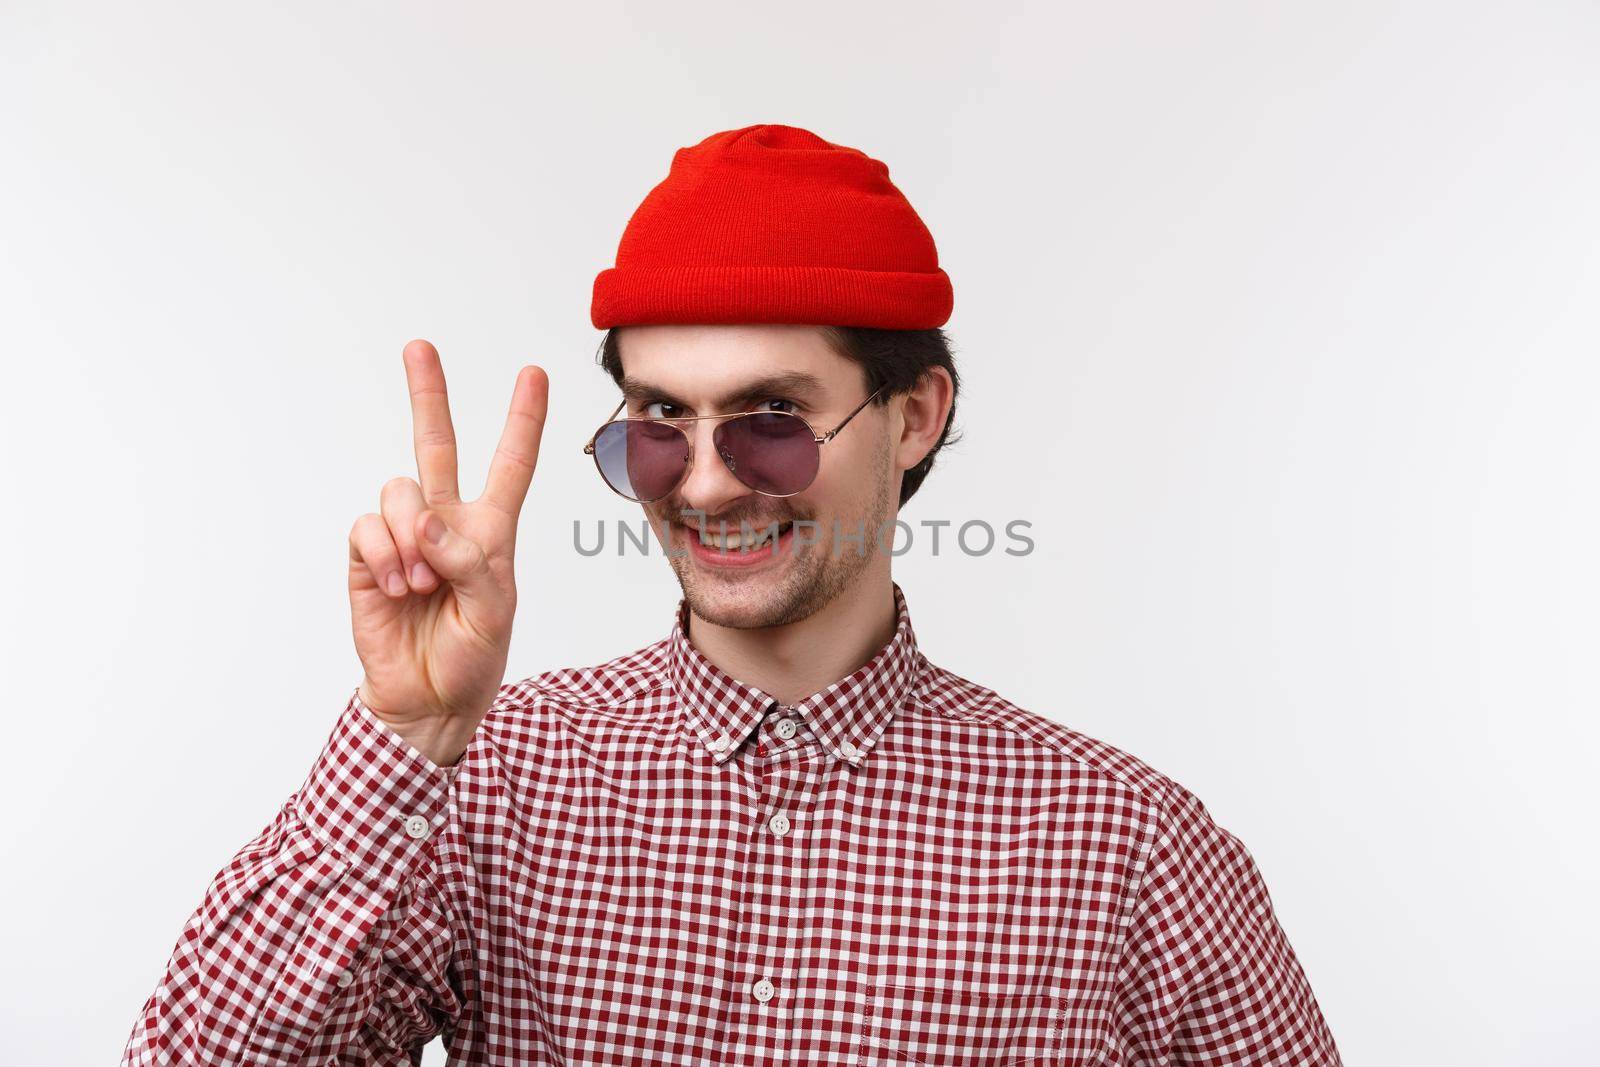 Close-up portrait funny and outgoing hipster man in red beanie, sunglasses and check shirt, getting ready summer vacation, showing peace gesture and smiling, stand white background.